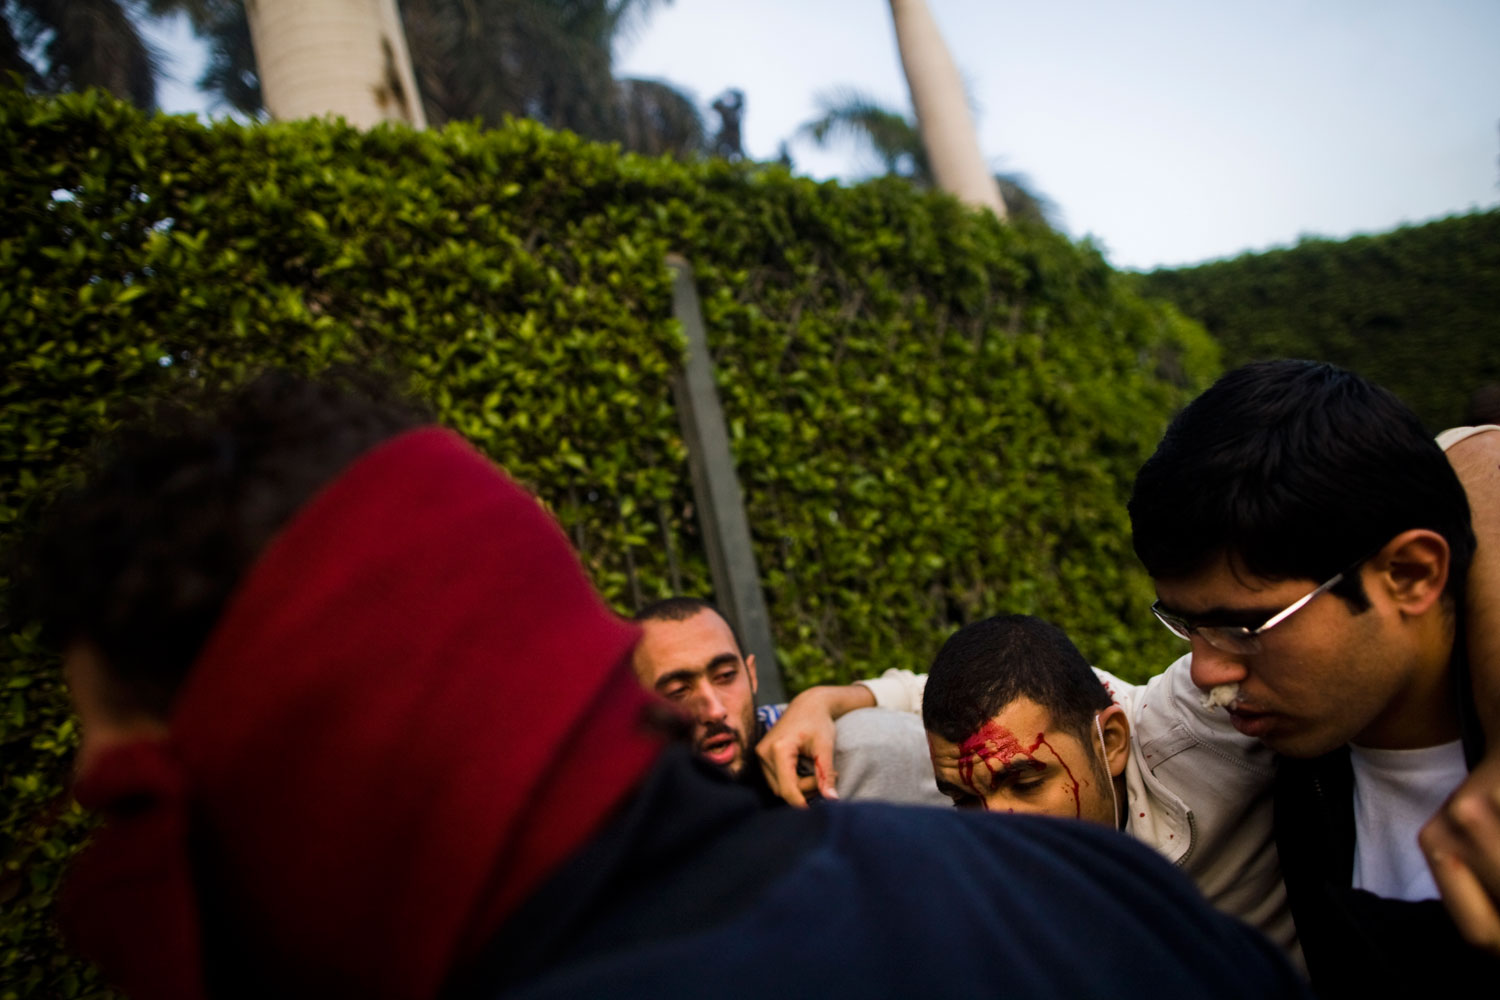 A wounded protestor is carried away after being injured during clashes with police near Tahir Square.